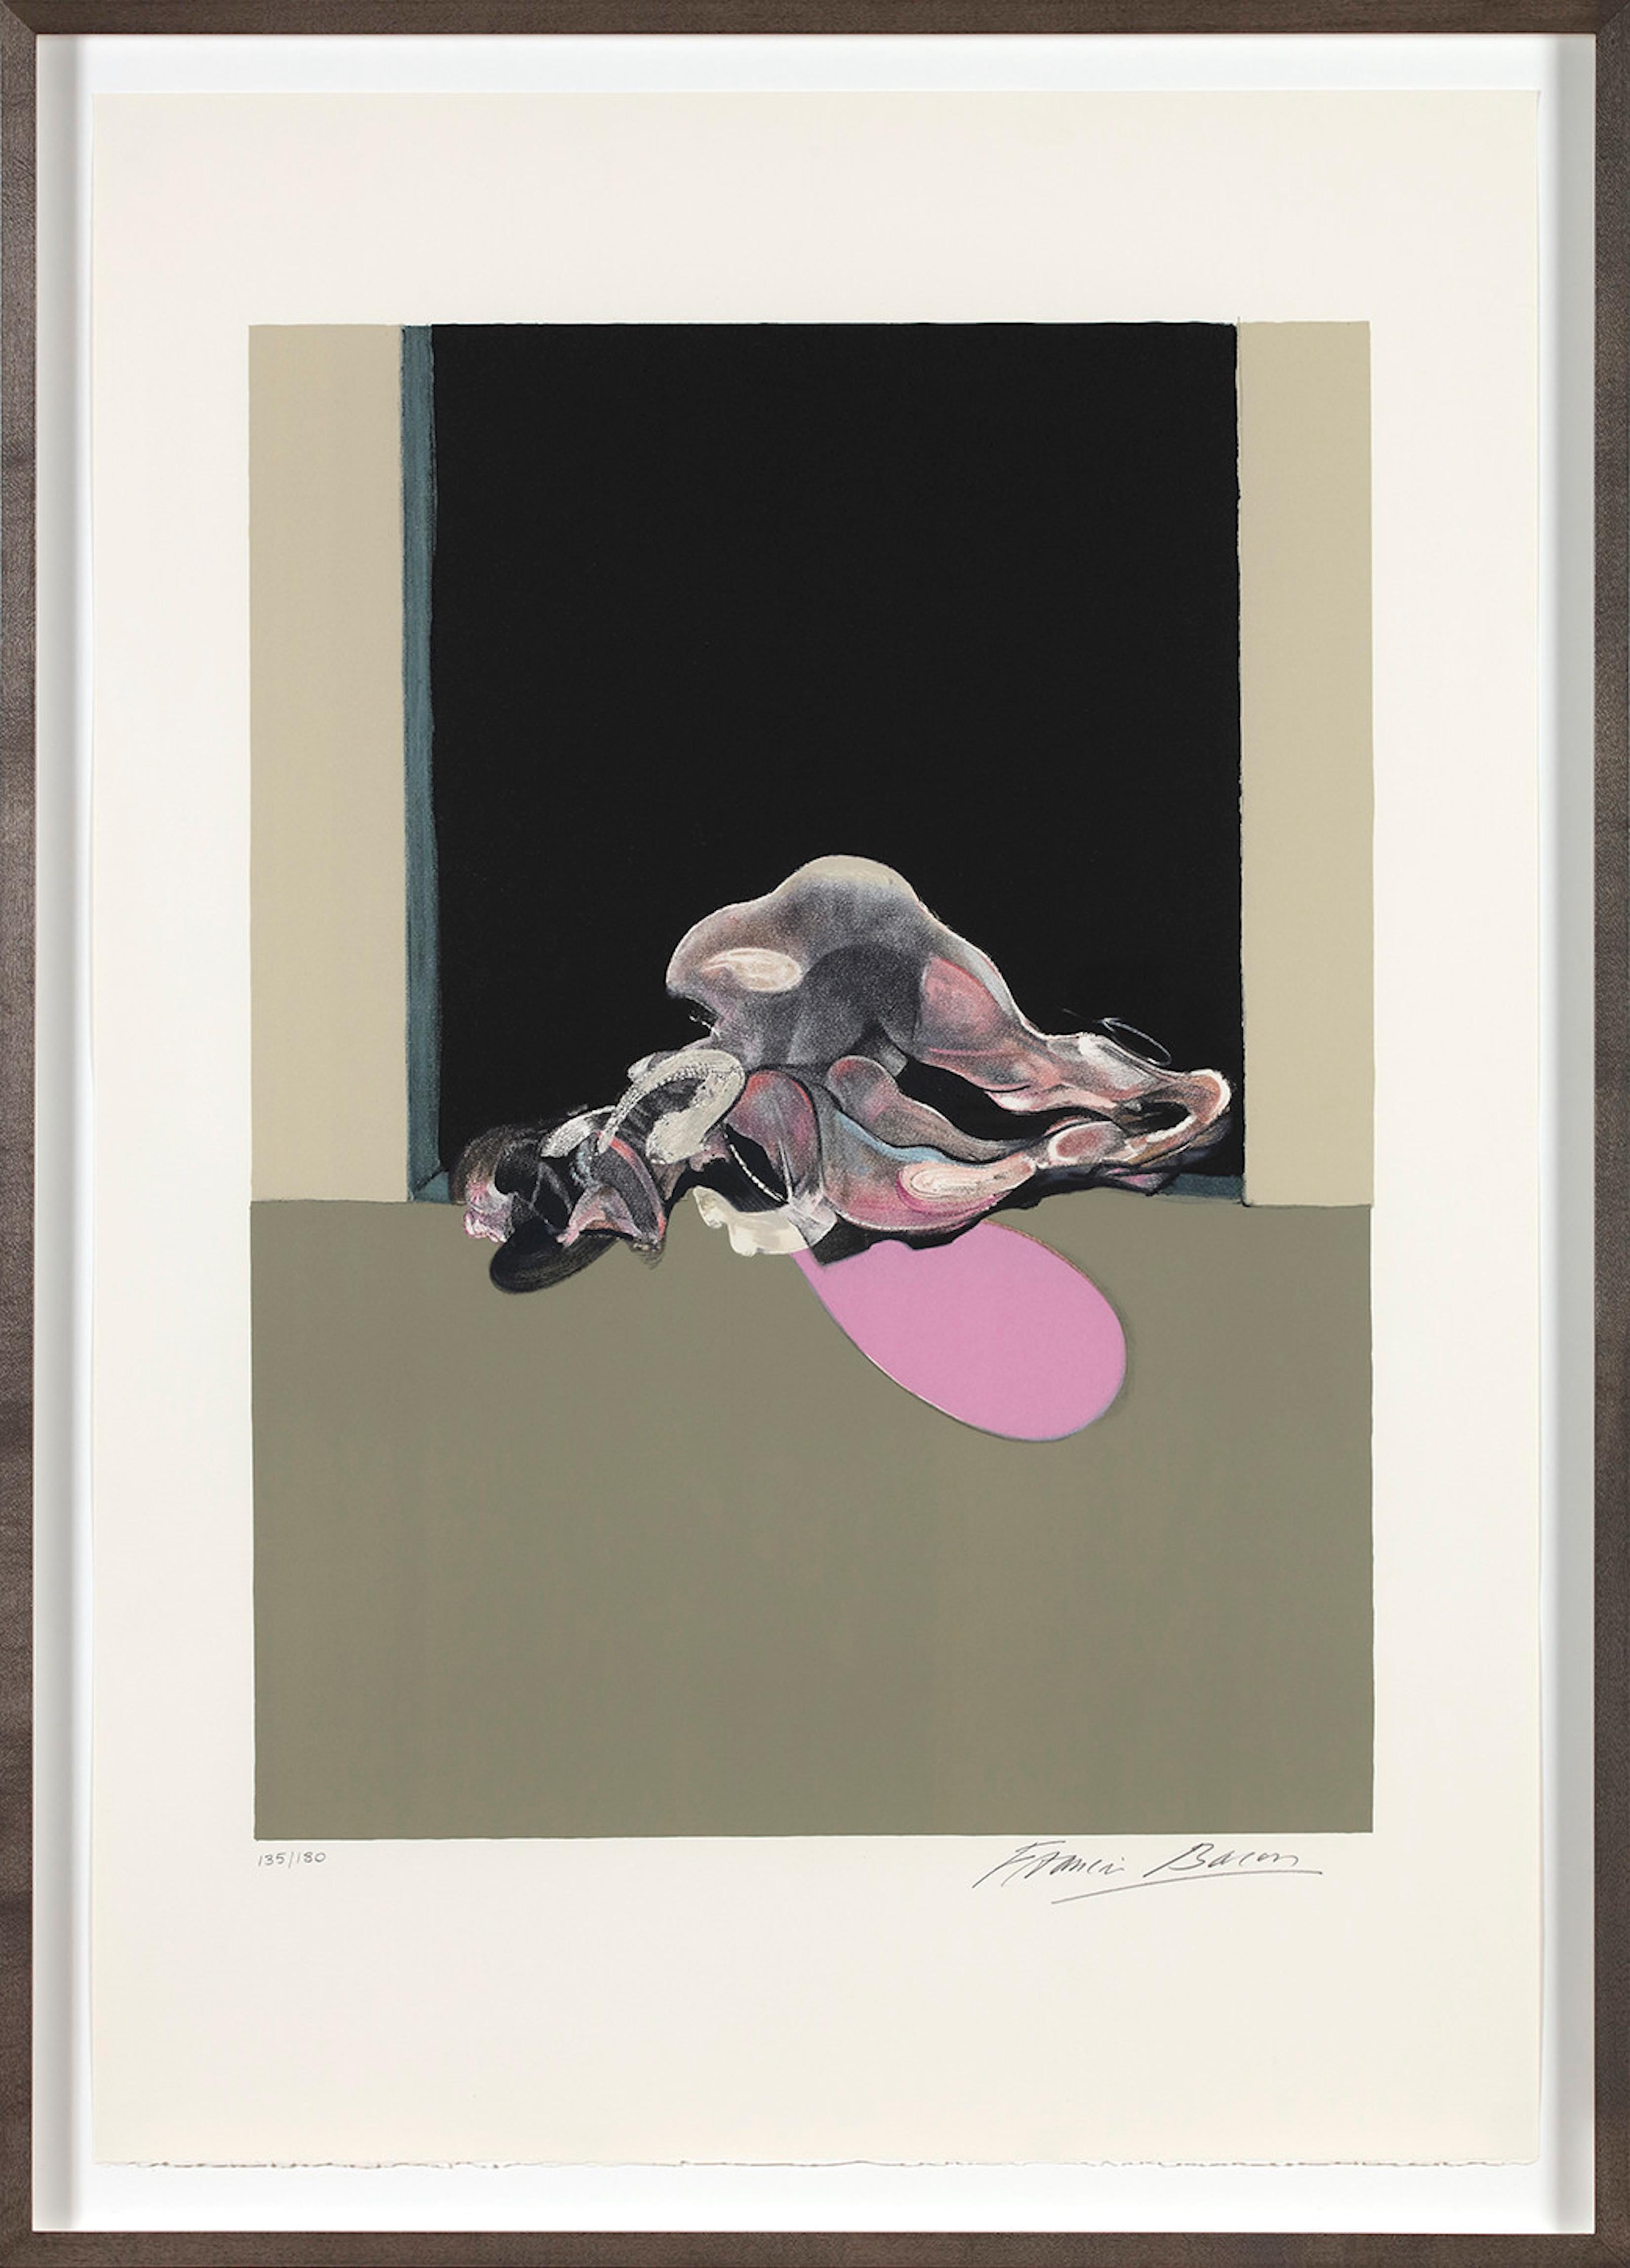 Francis Bacon Figurative Print - Triptych - August 1972 (Center Panel Only)